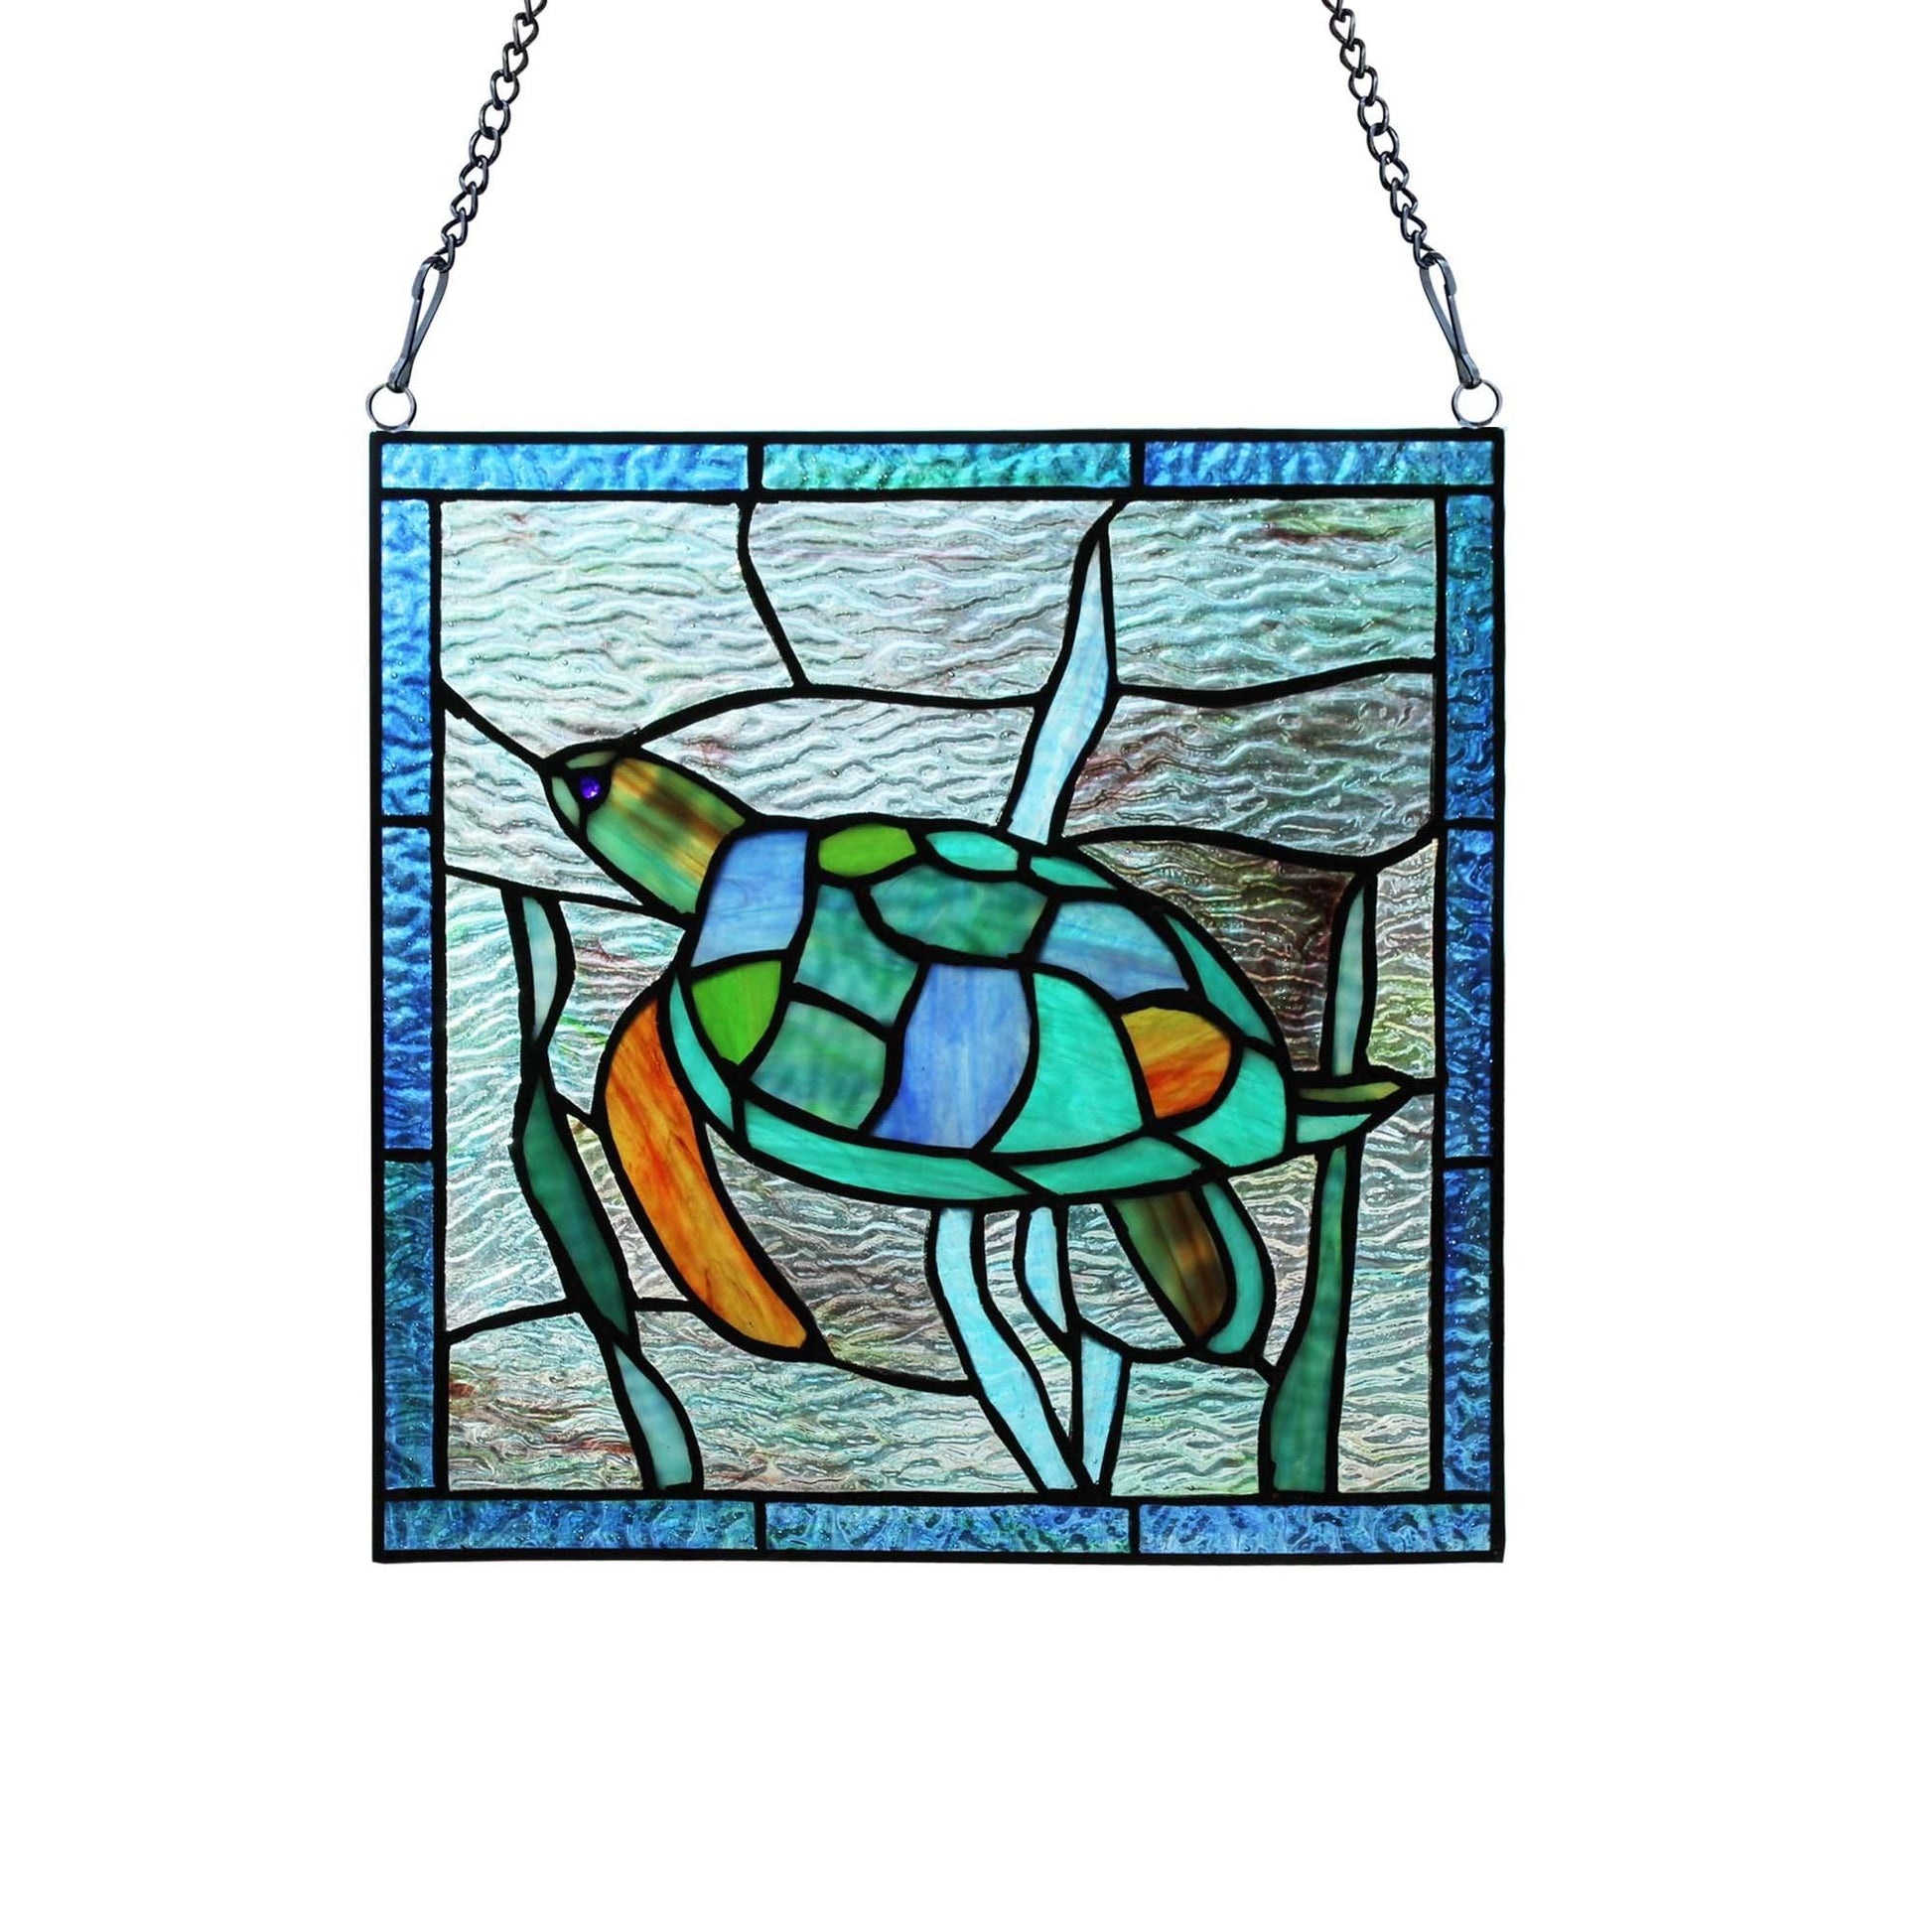 Under the Waves Stained Glass Art - Wild Wings